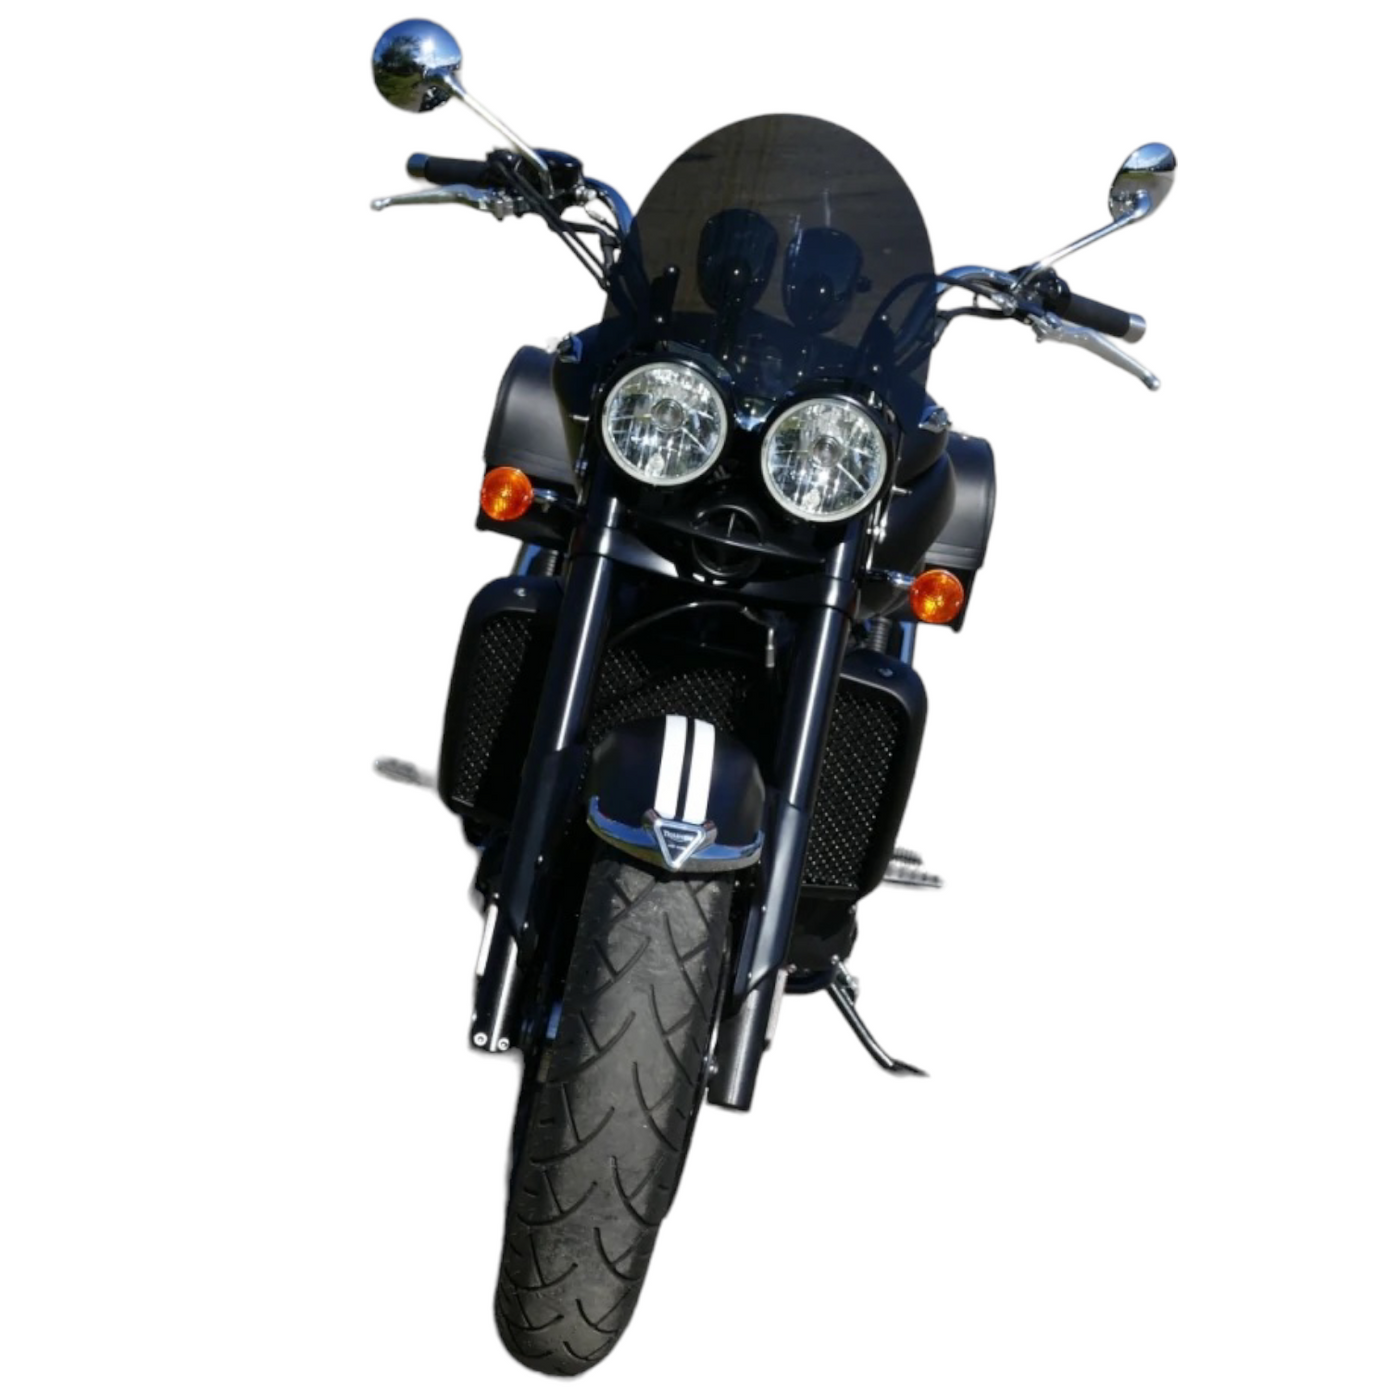 Flyscreen Upgrade Kit for Triumph Rocket III (2004 - 2019)